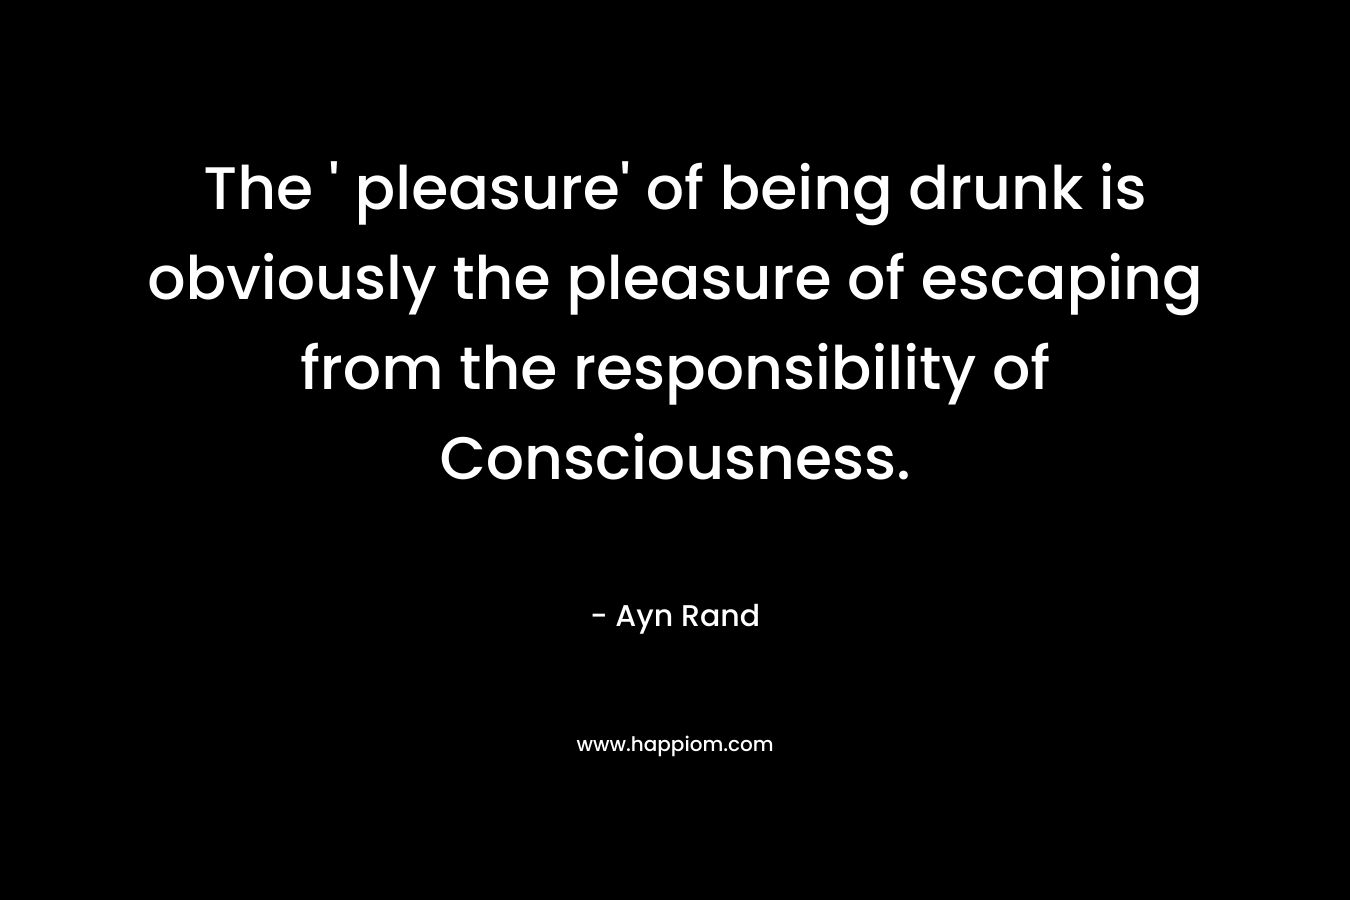 The ' pleasure' of being drunk is obviously the pleasure of escaping from the responsibility of Consciousness.